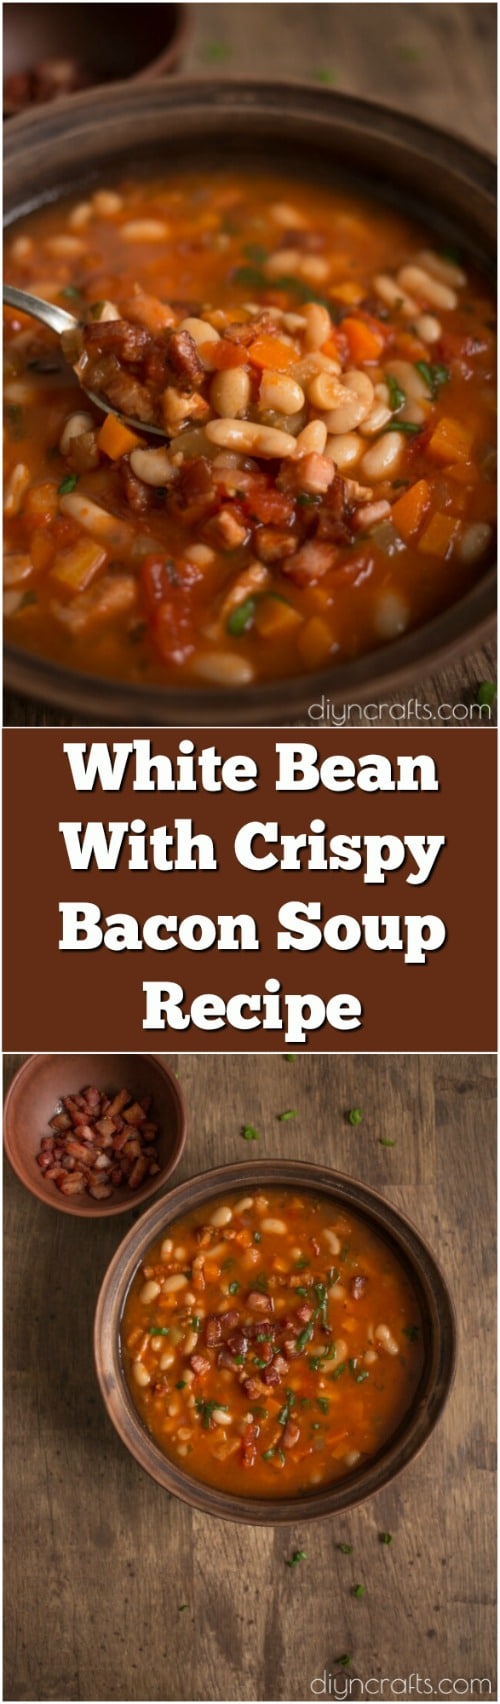 White Bean With Crispy Bacon Soup - The Yummiest Soup For The Winter Blues